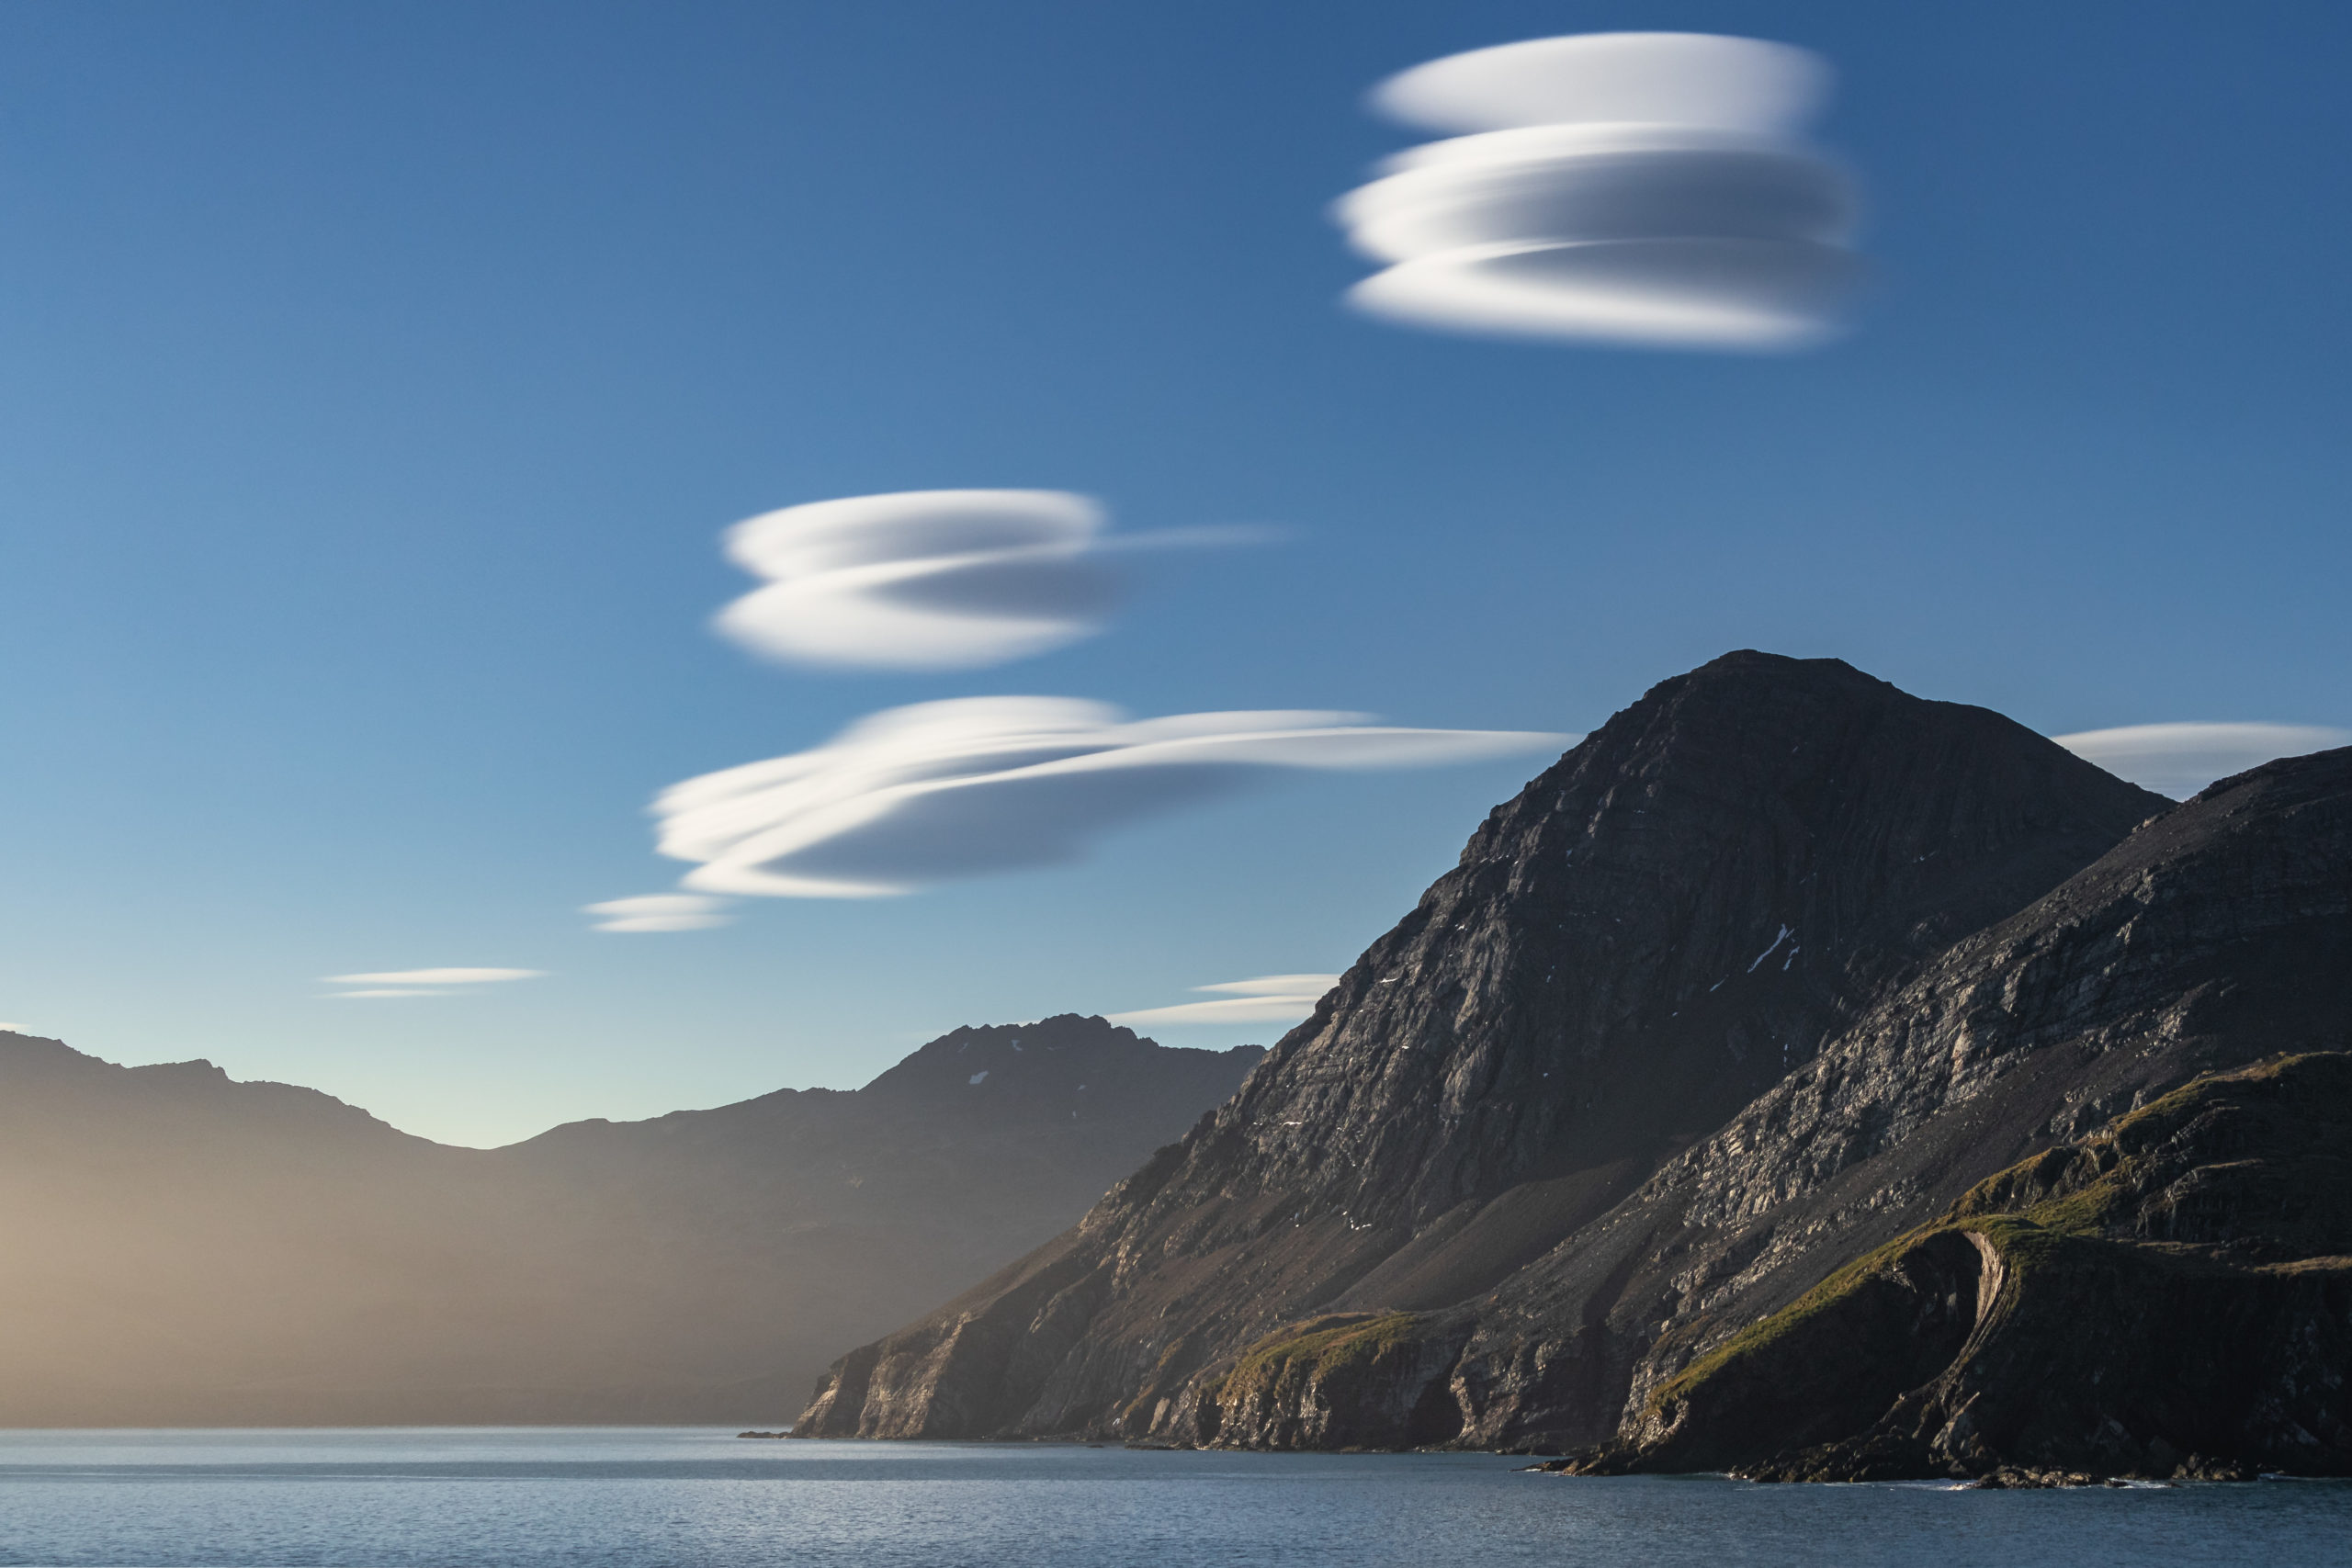 Lenticular clouds above the mountains on South Georgia Island